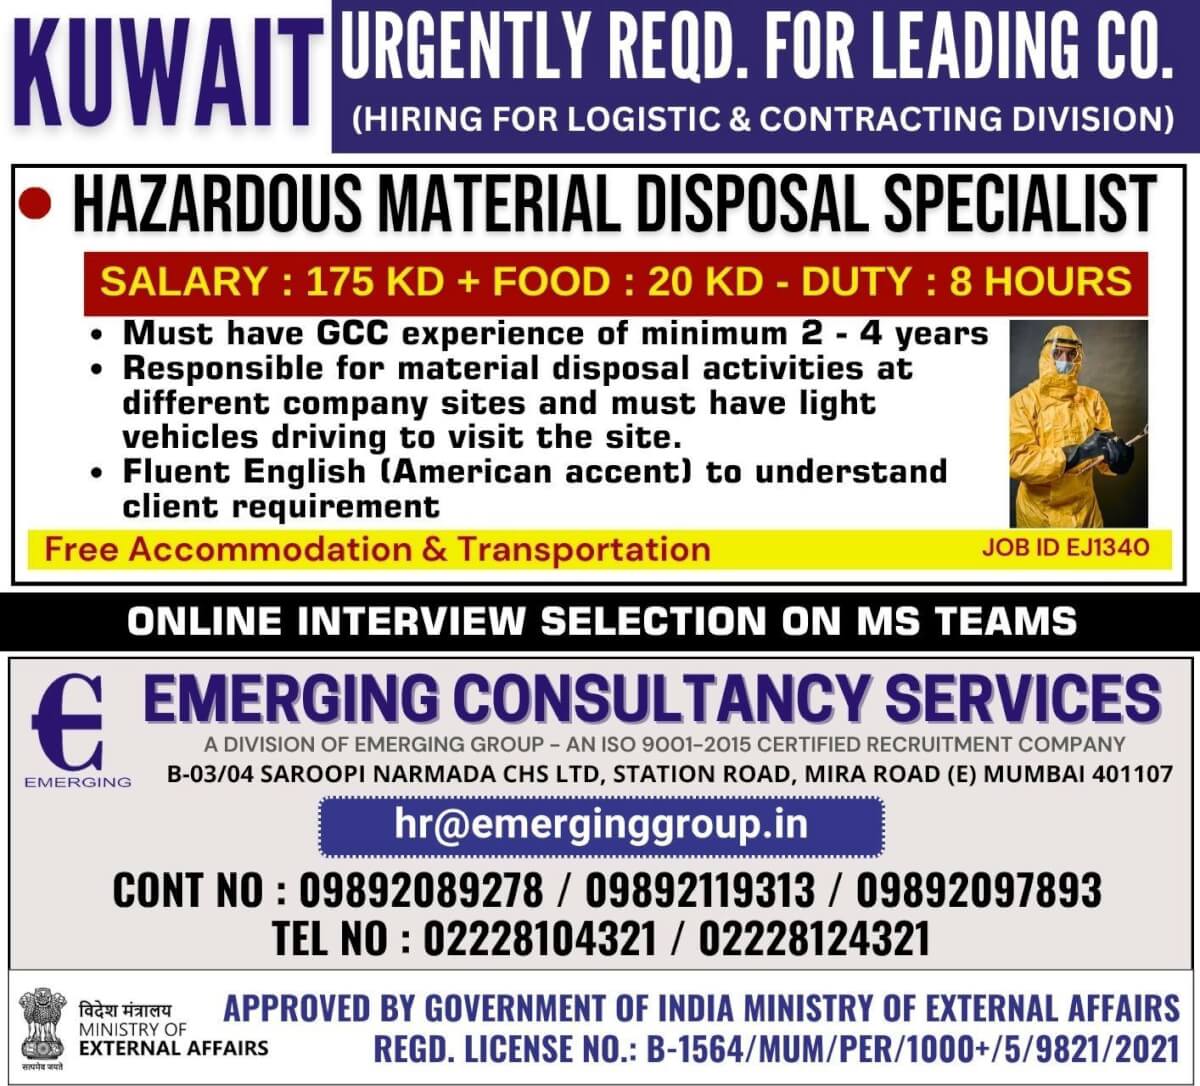 URGENTLY REQD. FOR LEADING CO. IN KUWAIT - LOGISTIC & CONTRACTING DIVISION